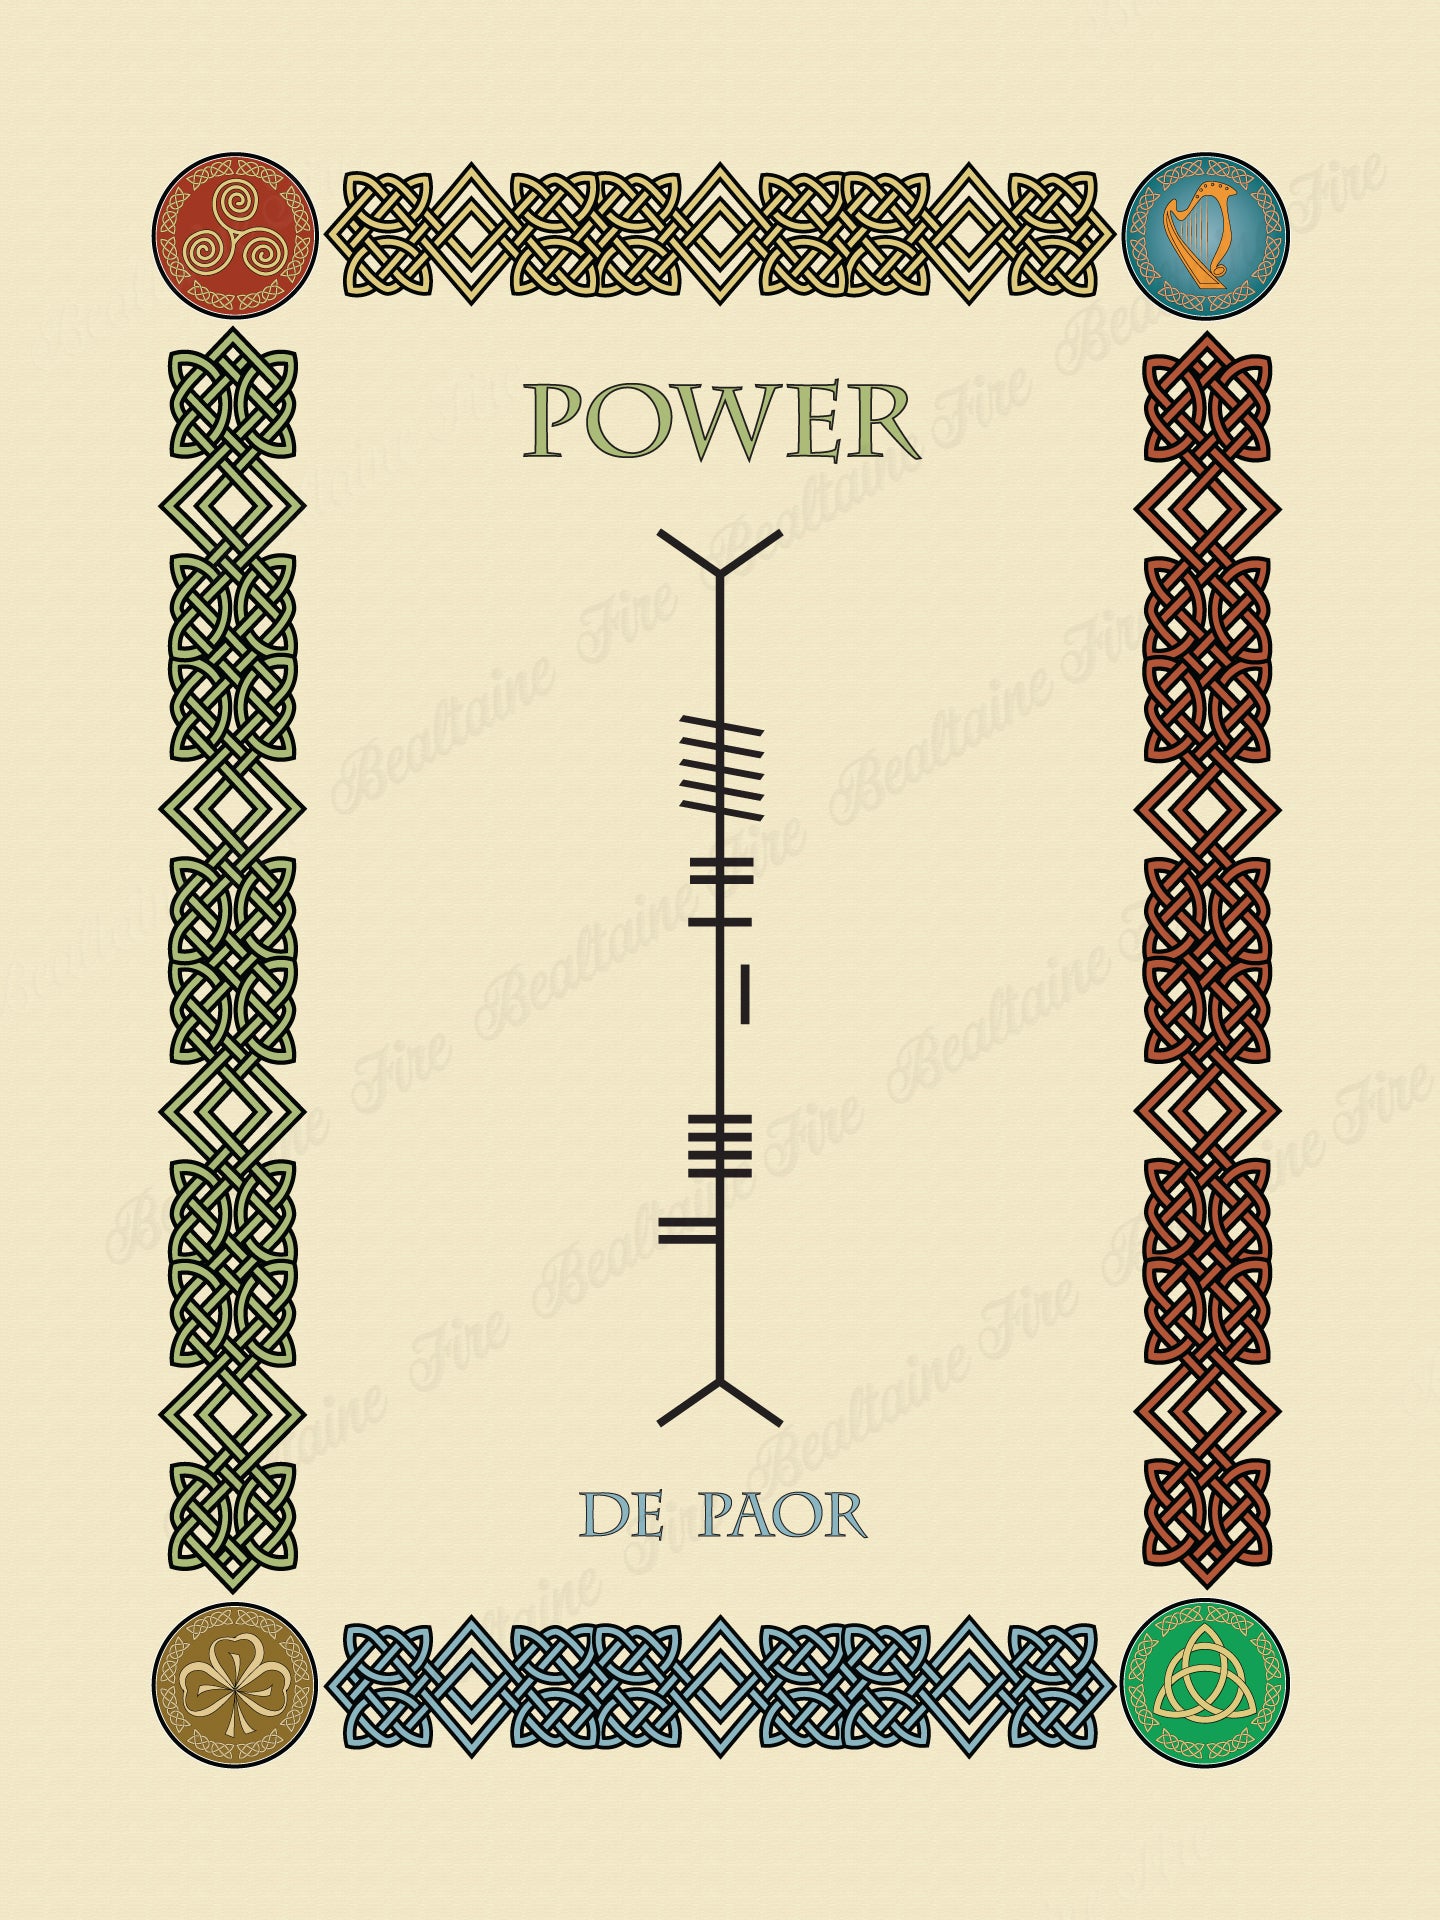 Power in Old Irish and Ogham - PDF Download